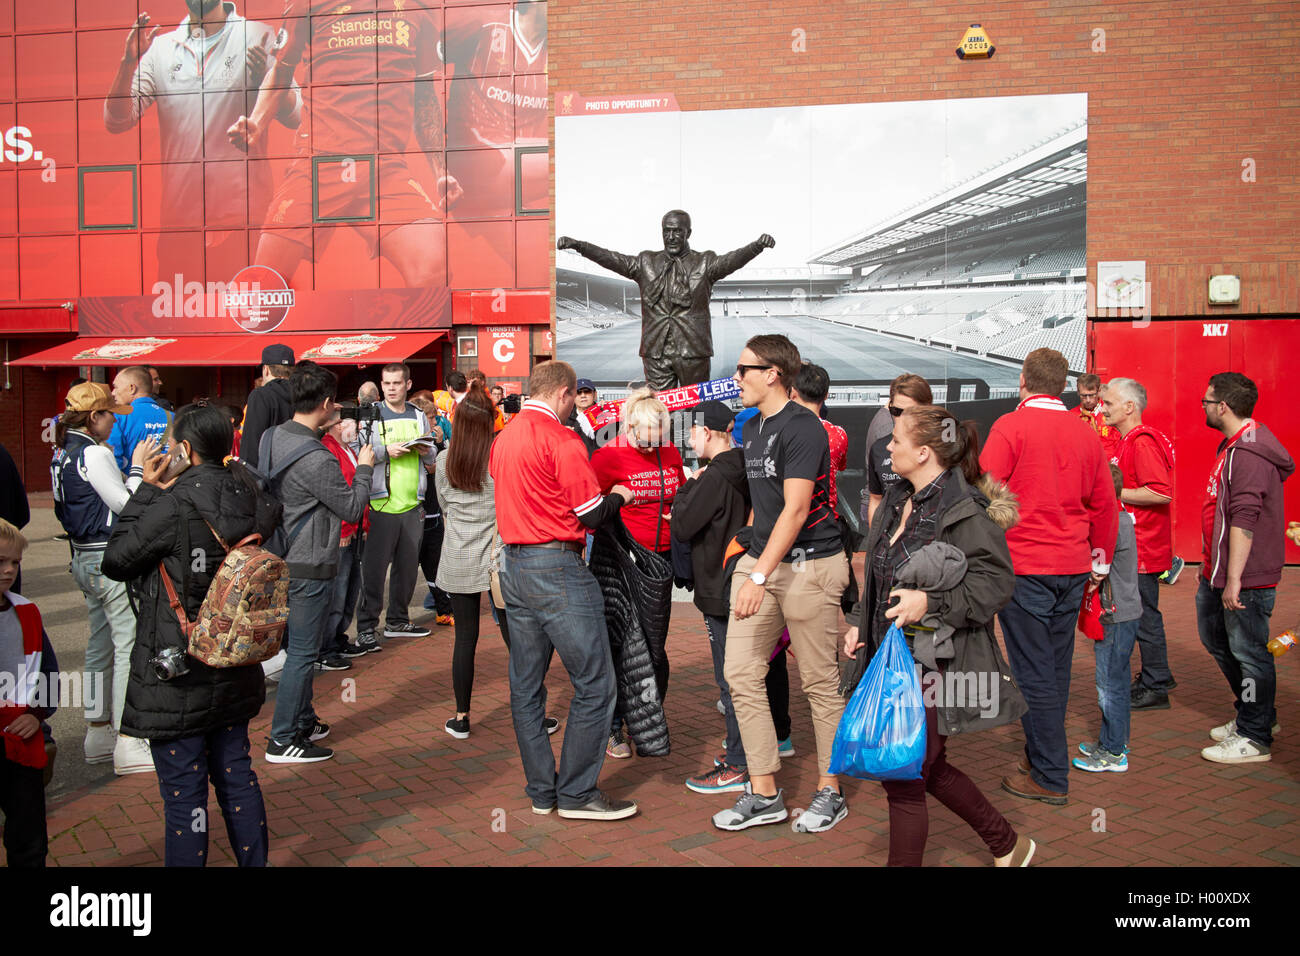 fans at the bill shankley statue at Liverpool FC anfield stadium Liverpool Merseyside UK Stock Photo